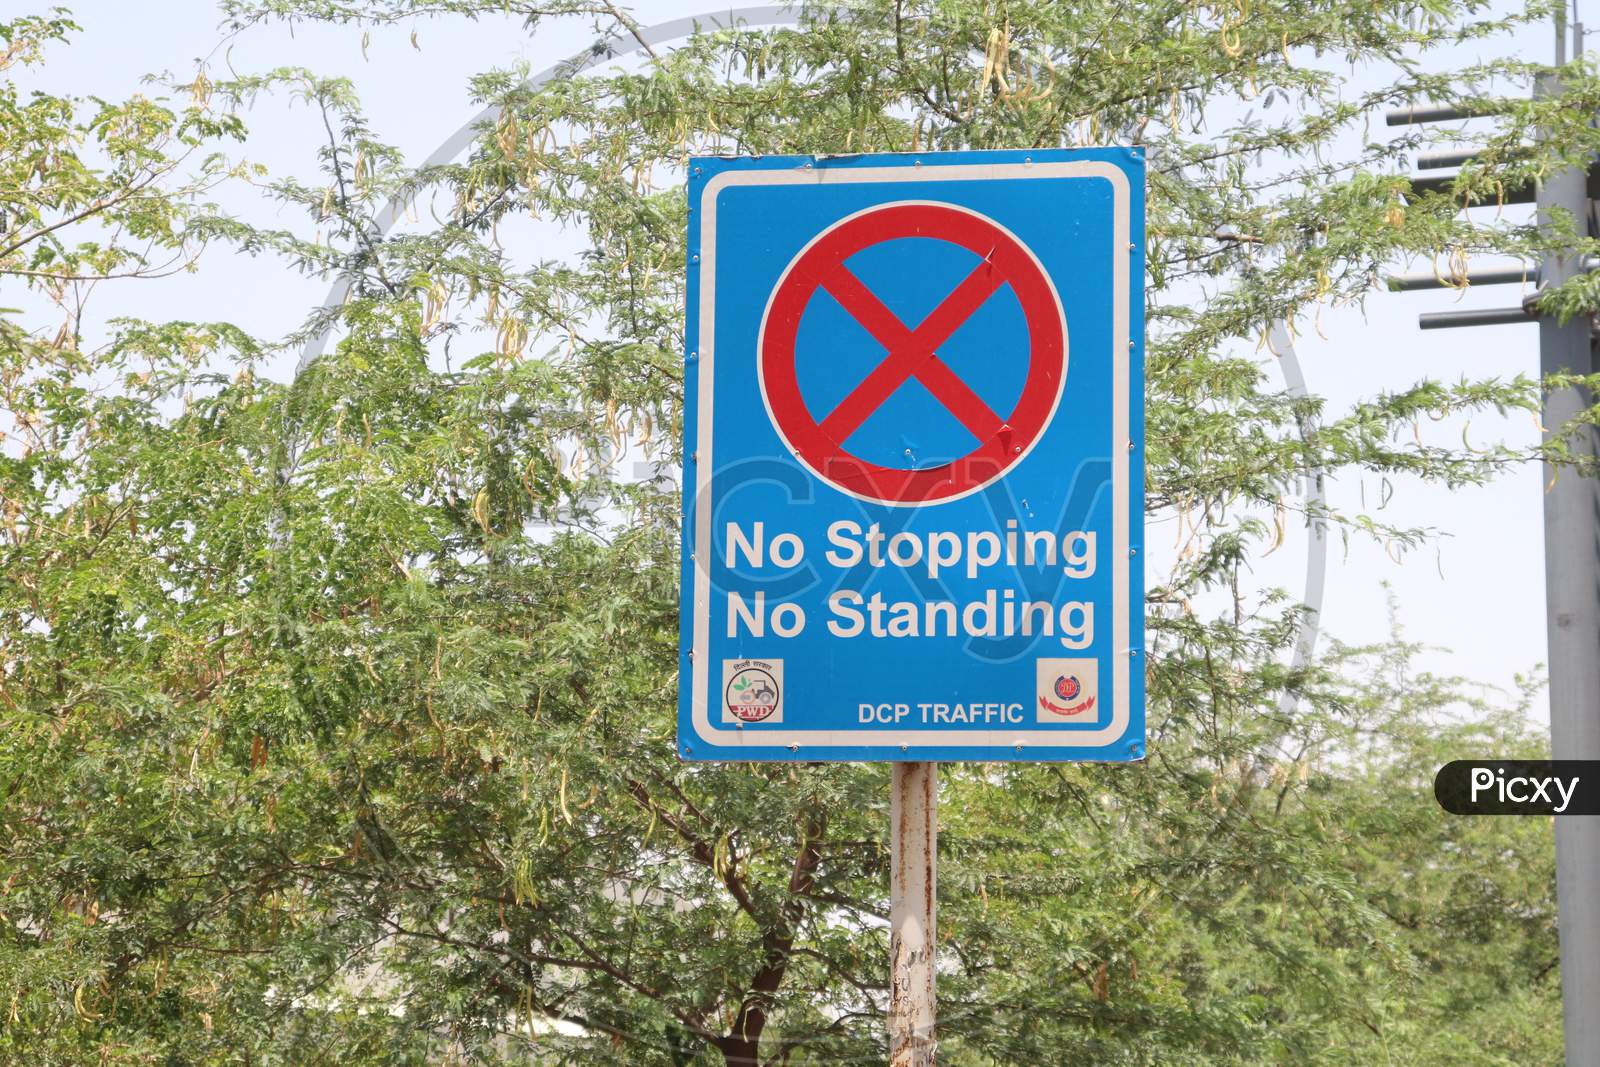 "New Delhi /India -27/05/2020 : Street Signs Are Necessary As They Let People Know About What To Do On The Roads. No Stopping No Standing   Texture In White "